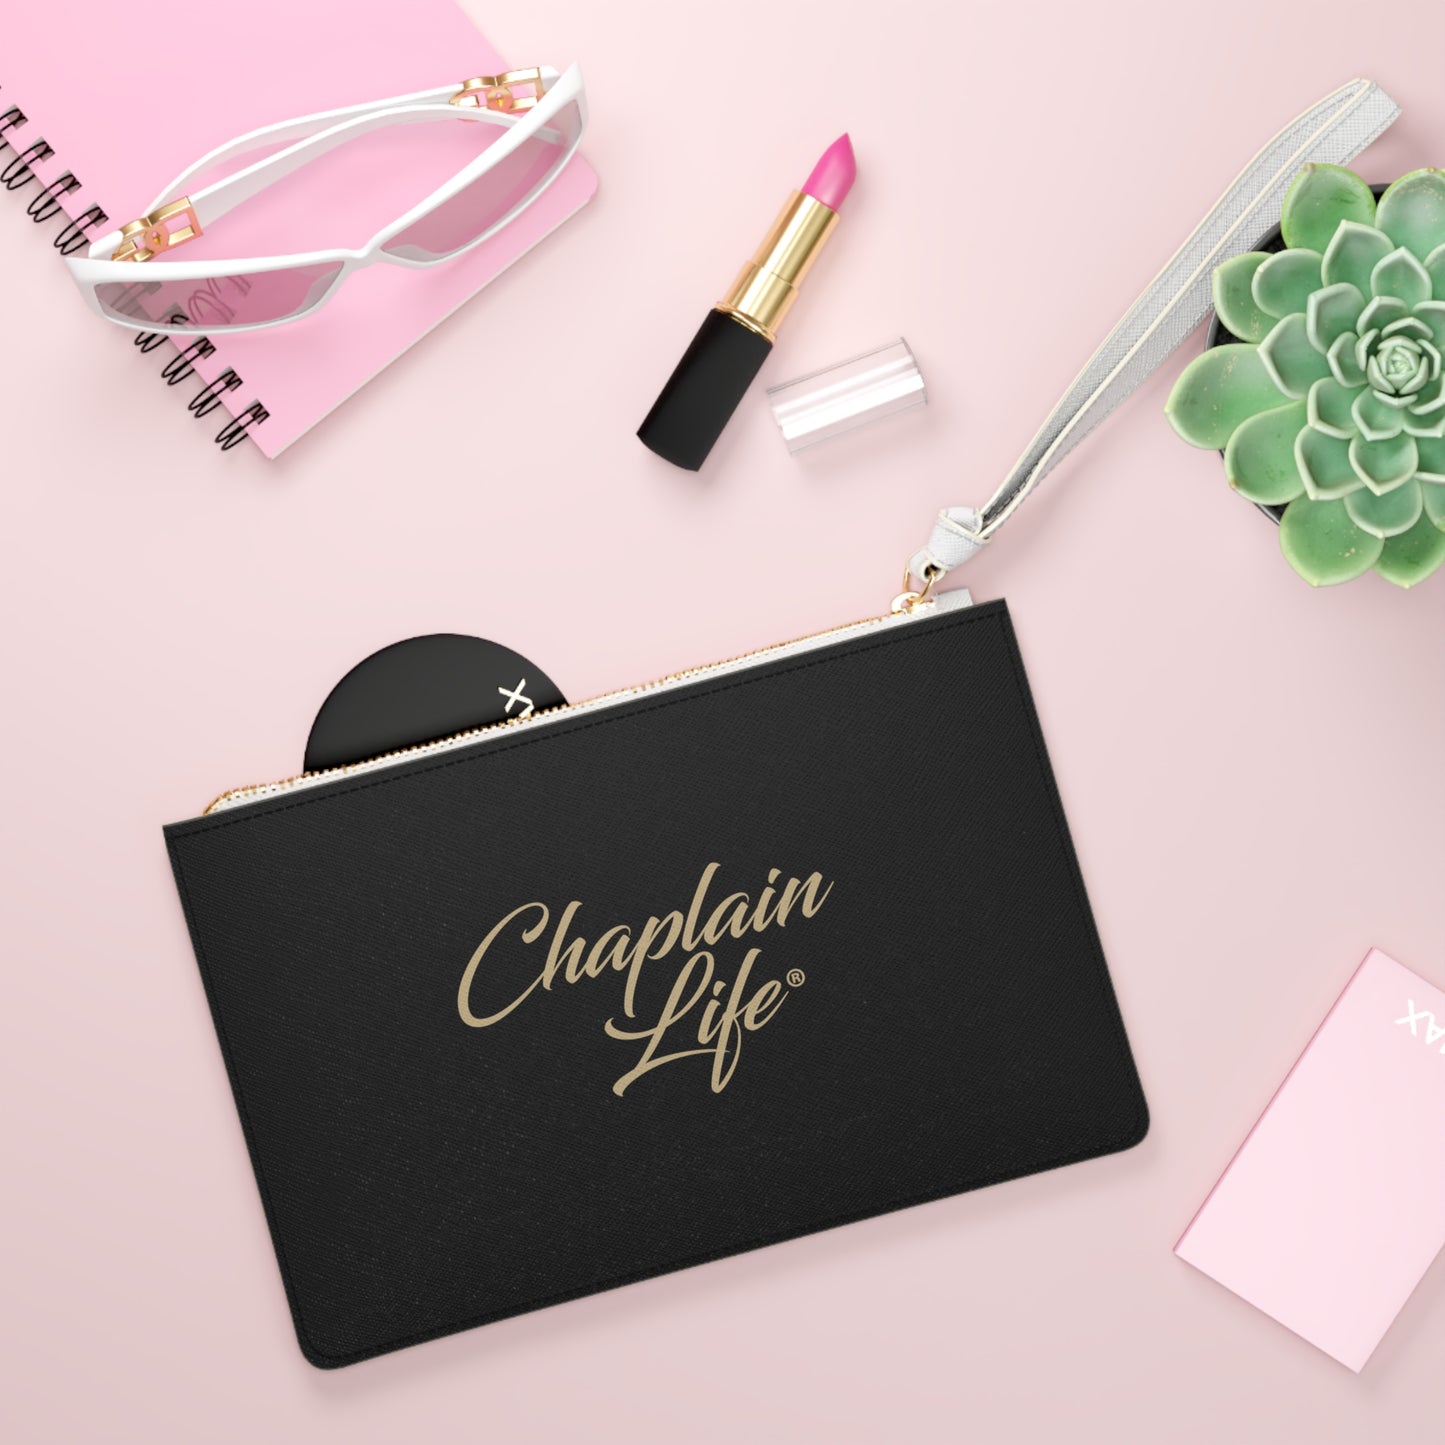 The Chaplain Clutch by Chaplain Life®